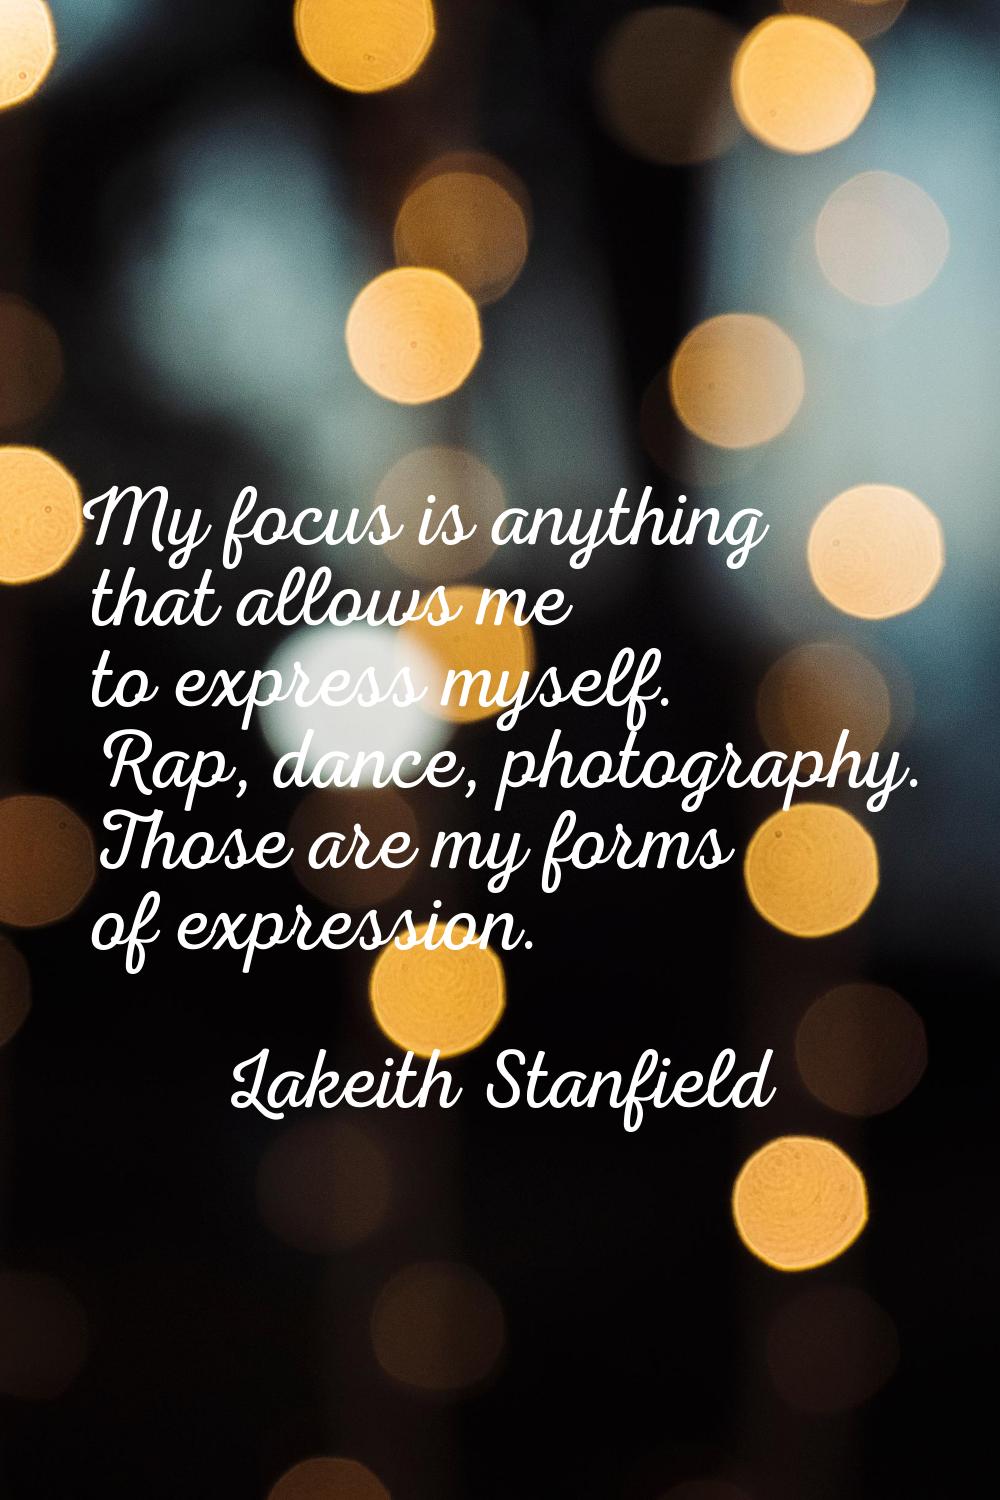 My focus is anything that allows me to express myself. Rap, dance, photography. Those are my forms 